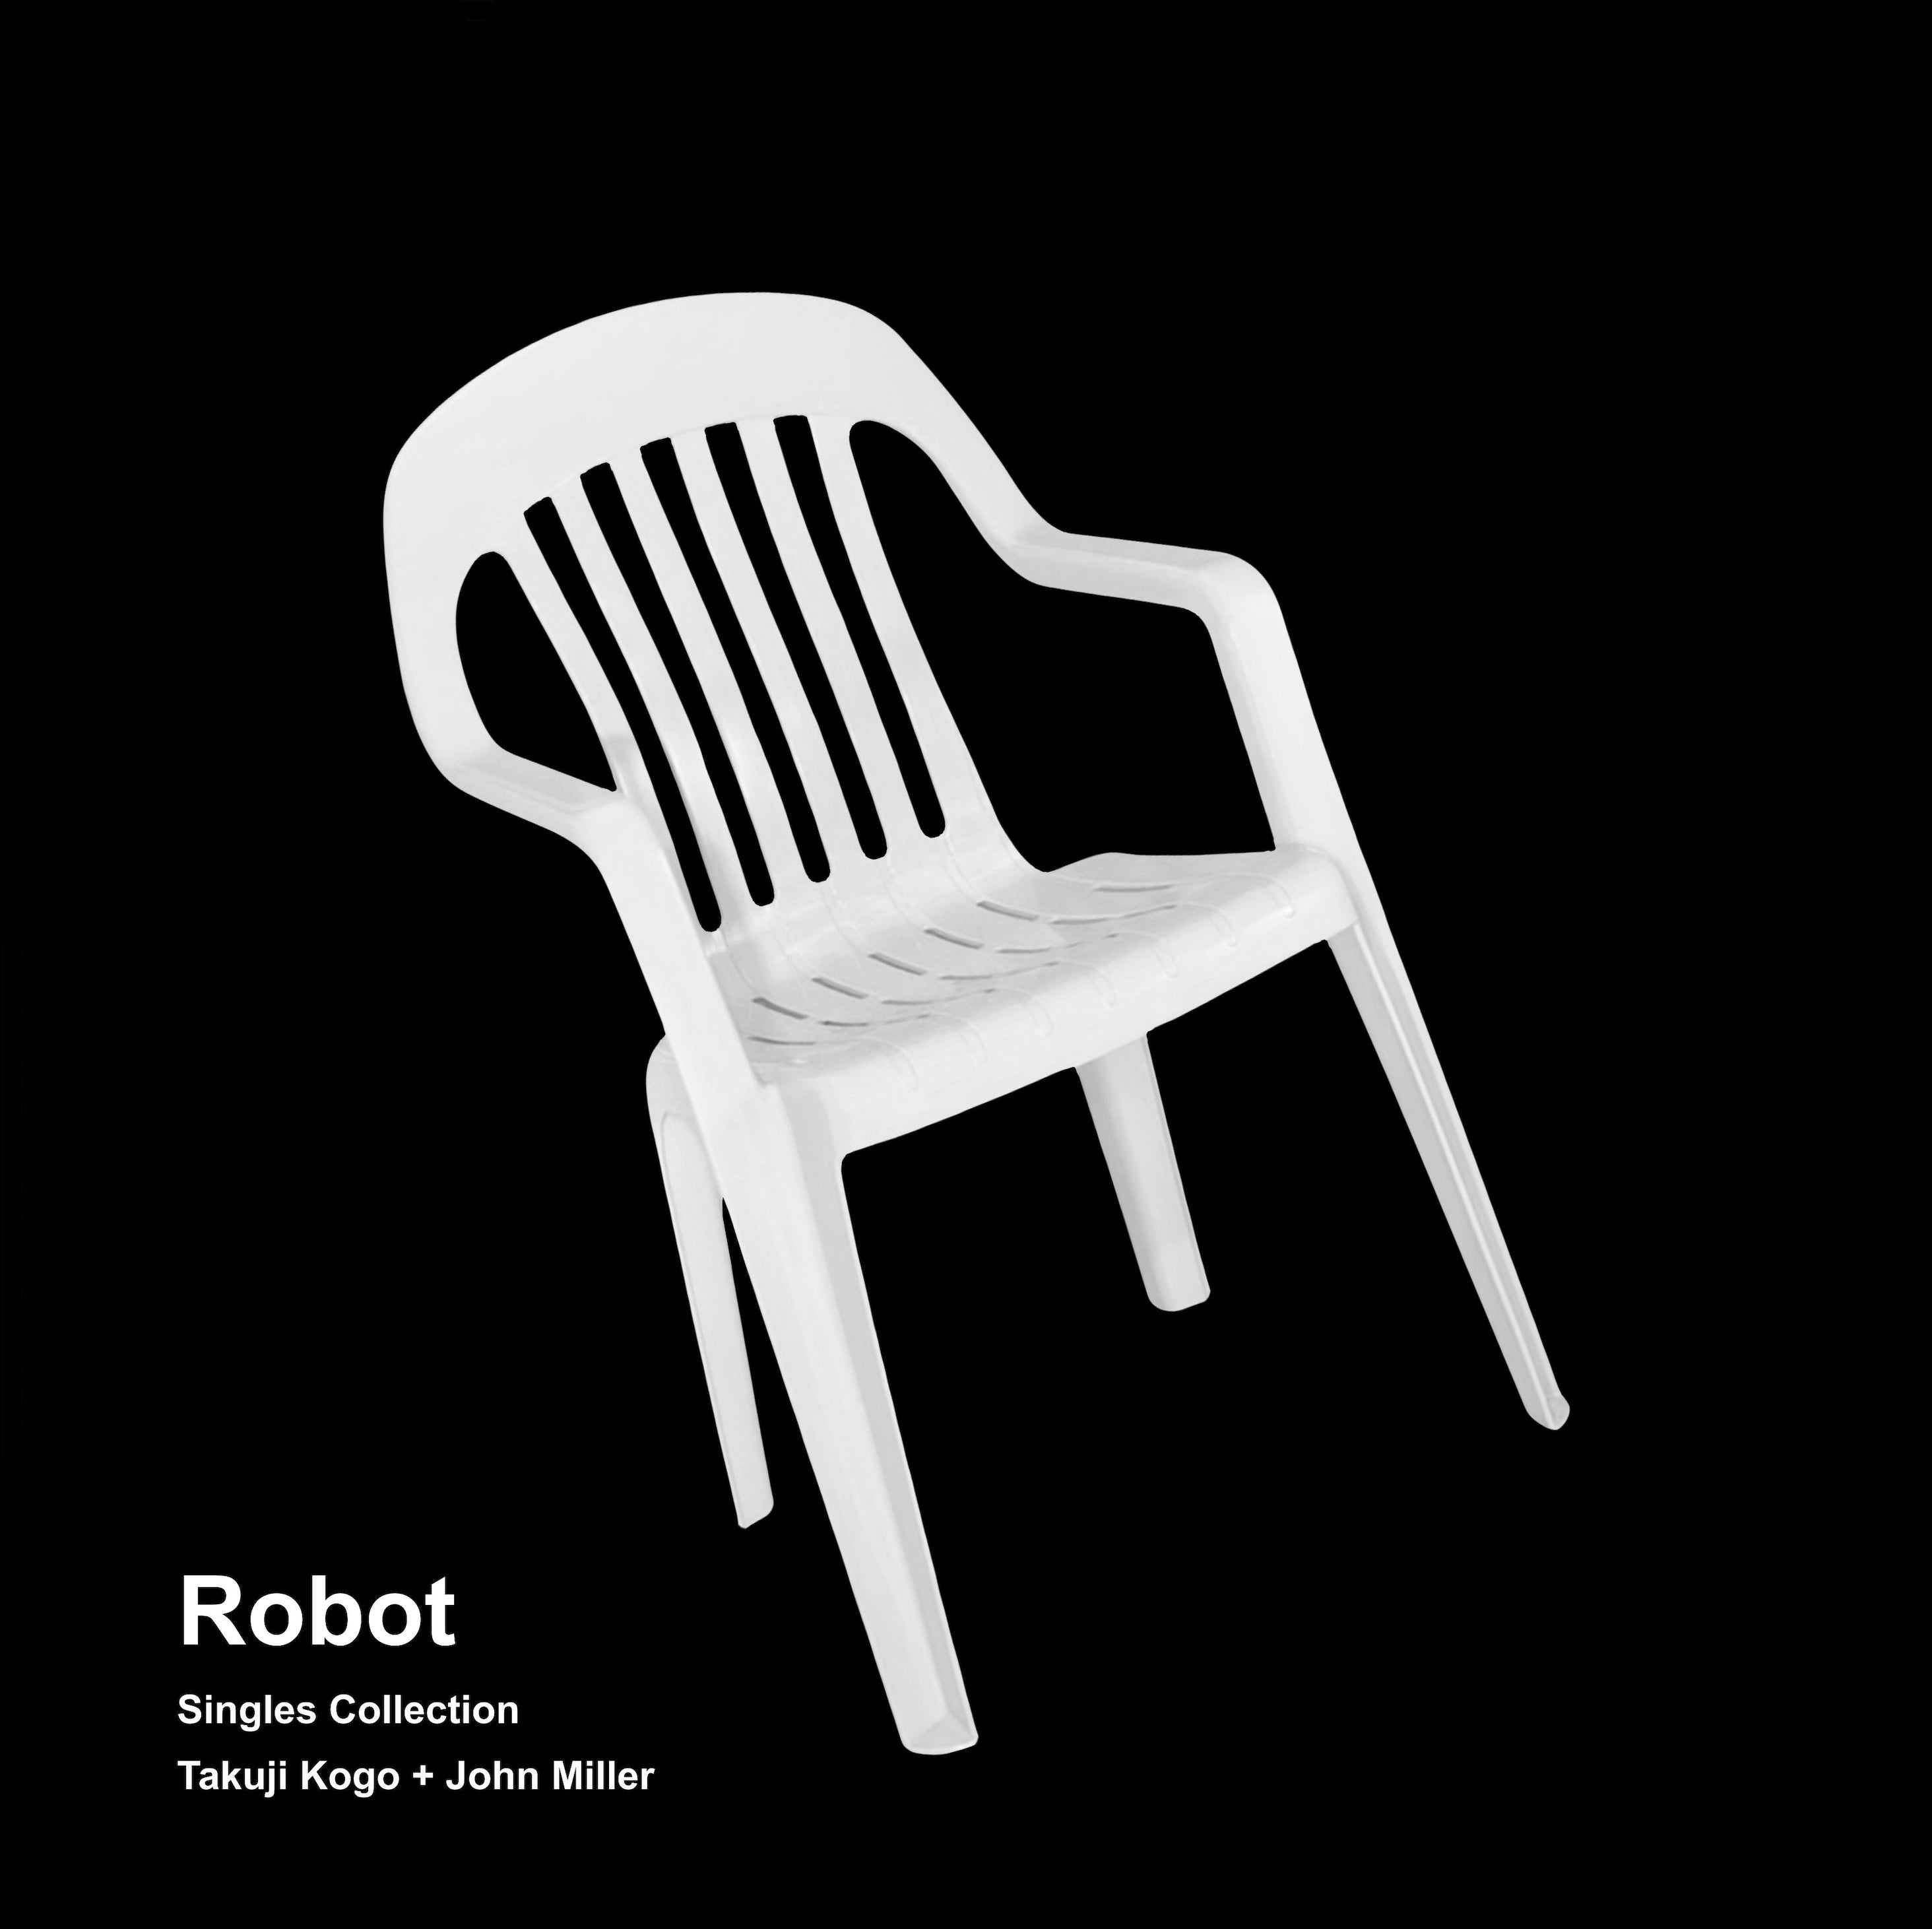 ROBOT - Singles Collection